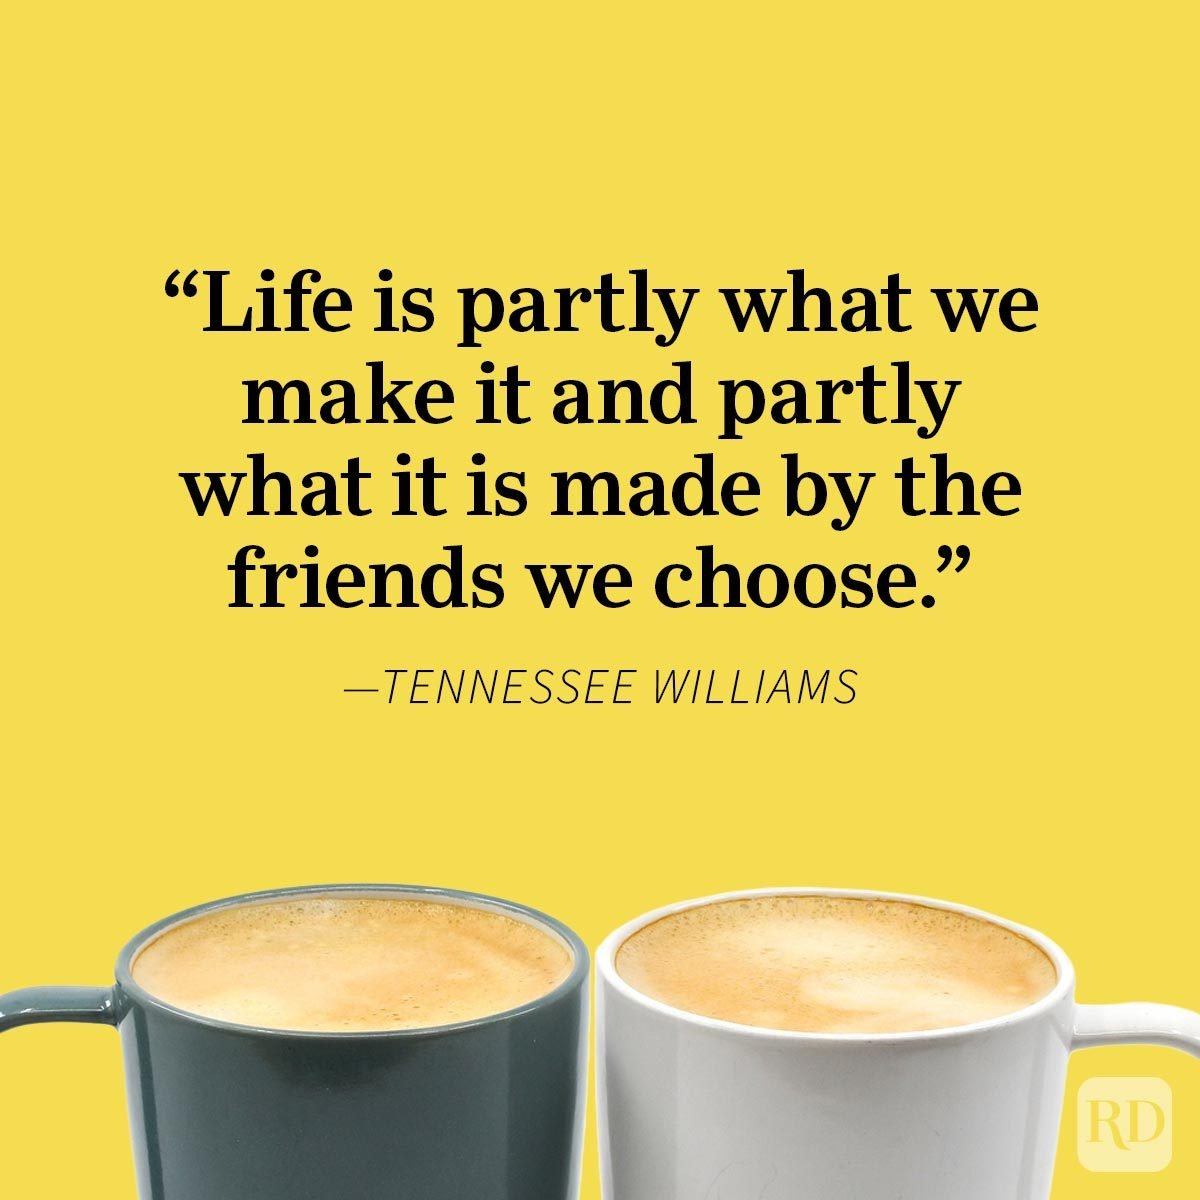 Friendship Quotes To Share With Your Bestie Tennessee Williams, two coffee mugs, yellow